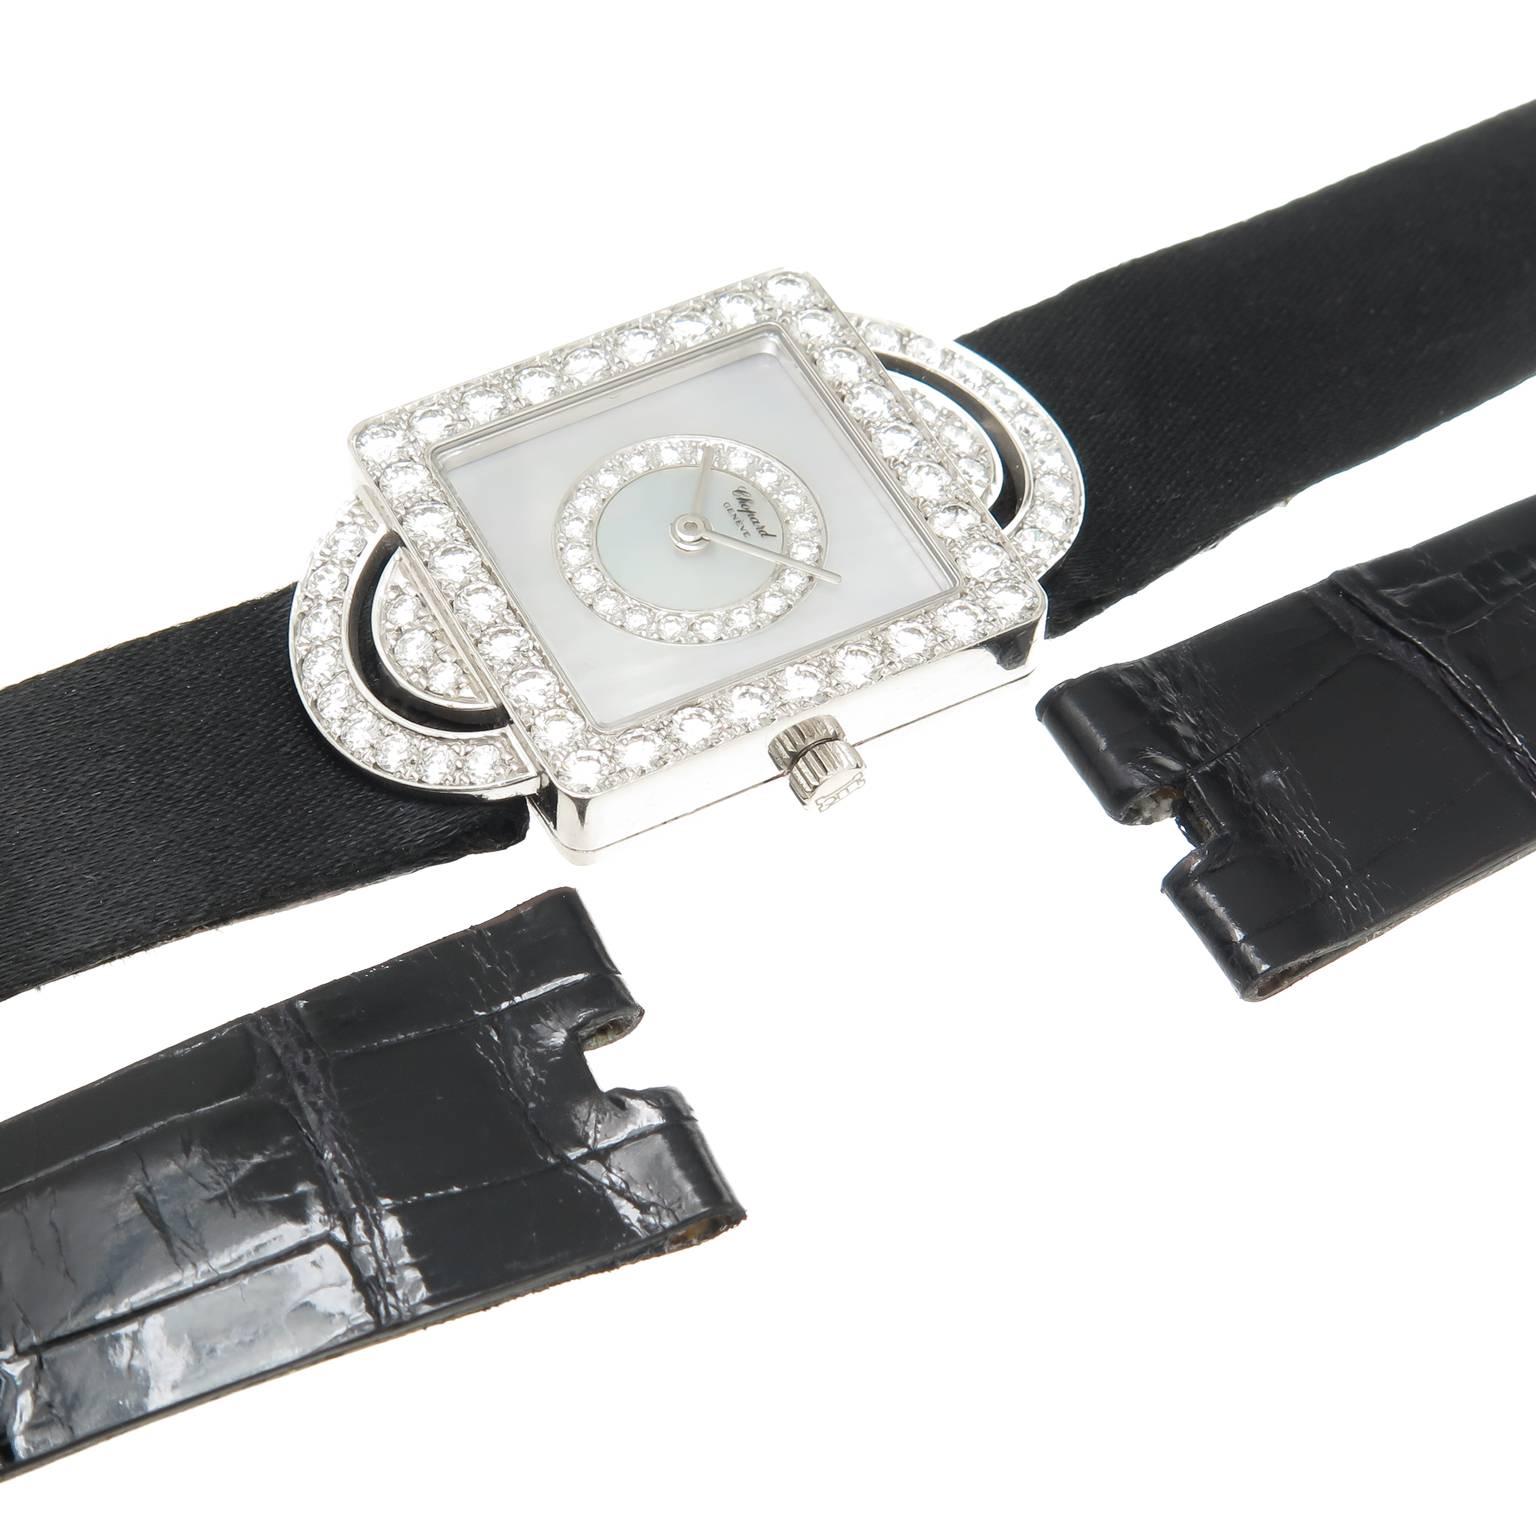 Circa 2010 Chopard Reference 13-5951, 18K white Gold 34 X 21 MM water resistant case, Fine White Round Brilliant cut Diamonds totaling 2 carats. Quartz Movement, Mother of Pearl dial set with Diamonds. Black Grosgrain Strap with Original white gold